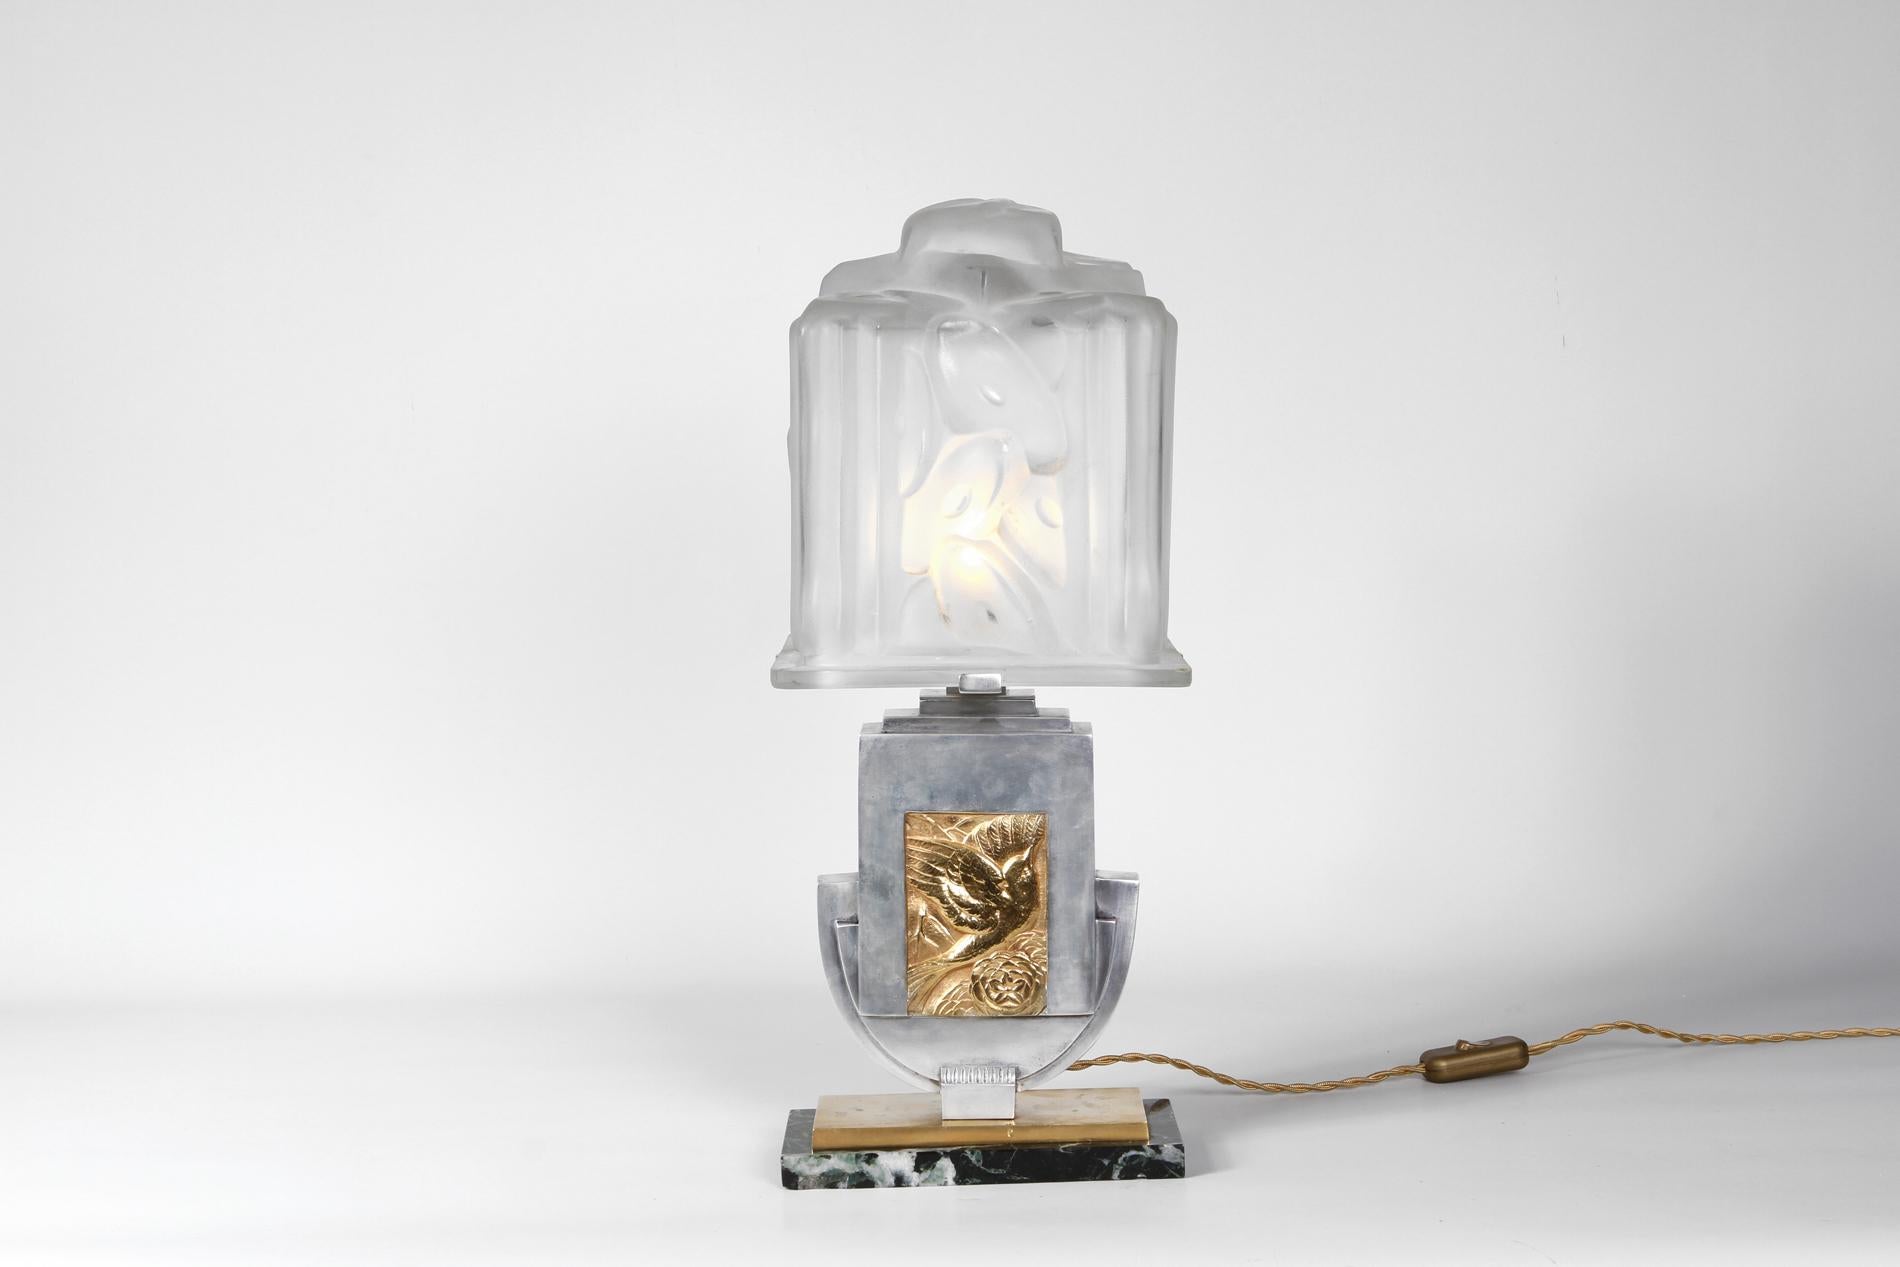 French Art Deco table lamp by Degué from 1930. Special model with base in marble, bronze in silver and gold and big glass lampshade. In the middle there is the decor of a bird with a flower in all gold details. 
The piece has a real impact and